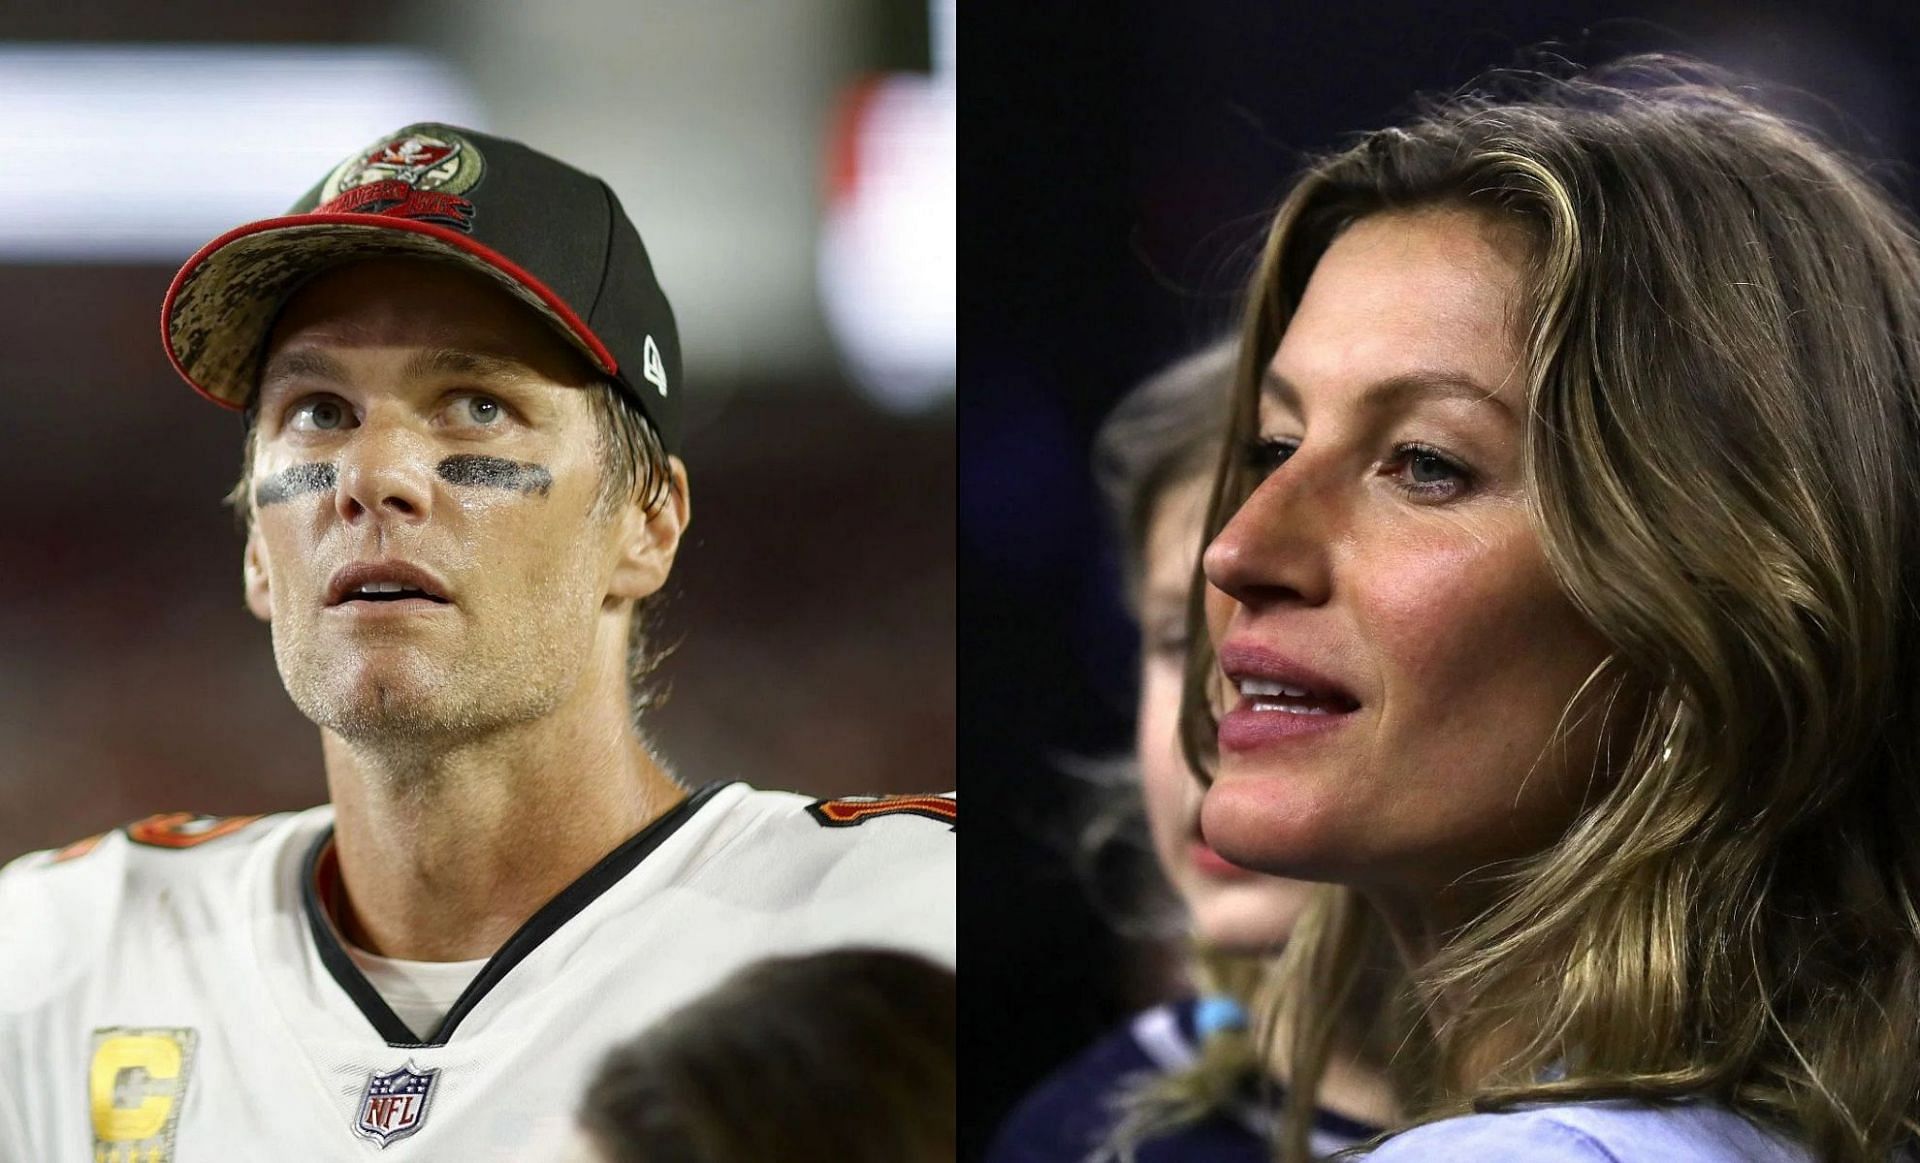 Will Tom Brady lose more than Gisele from FTX bankruptcy?